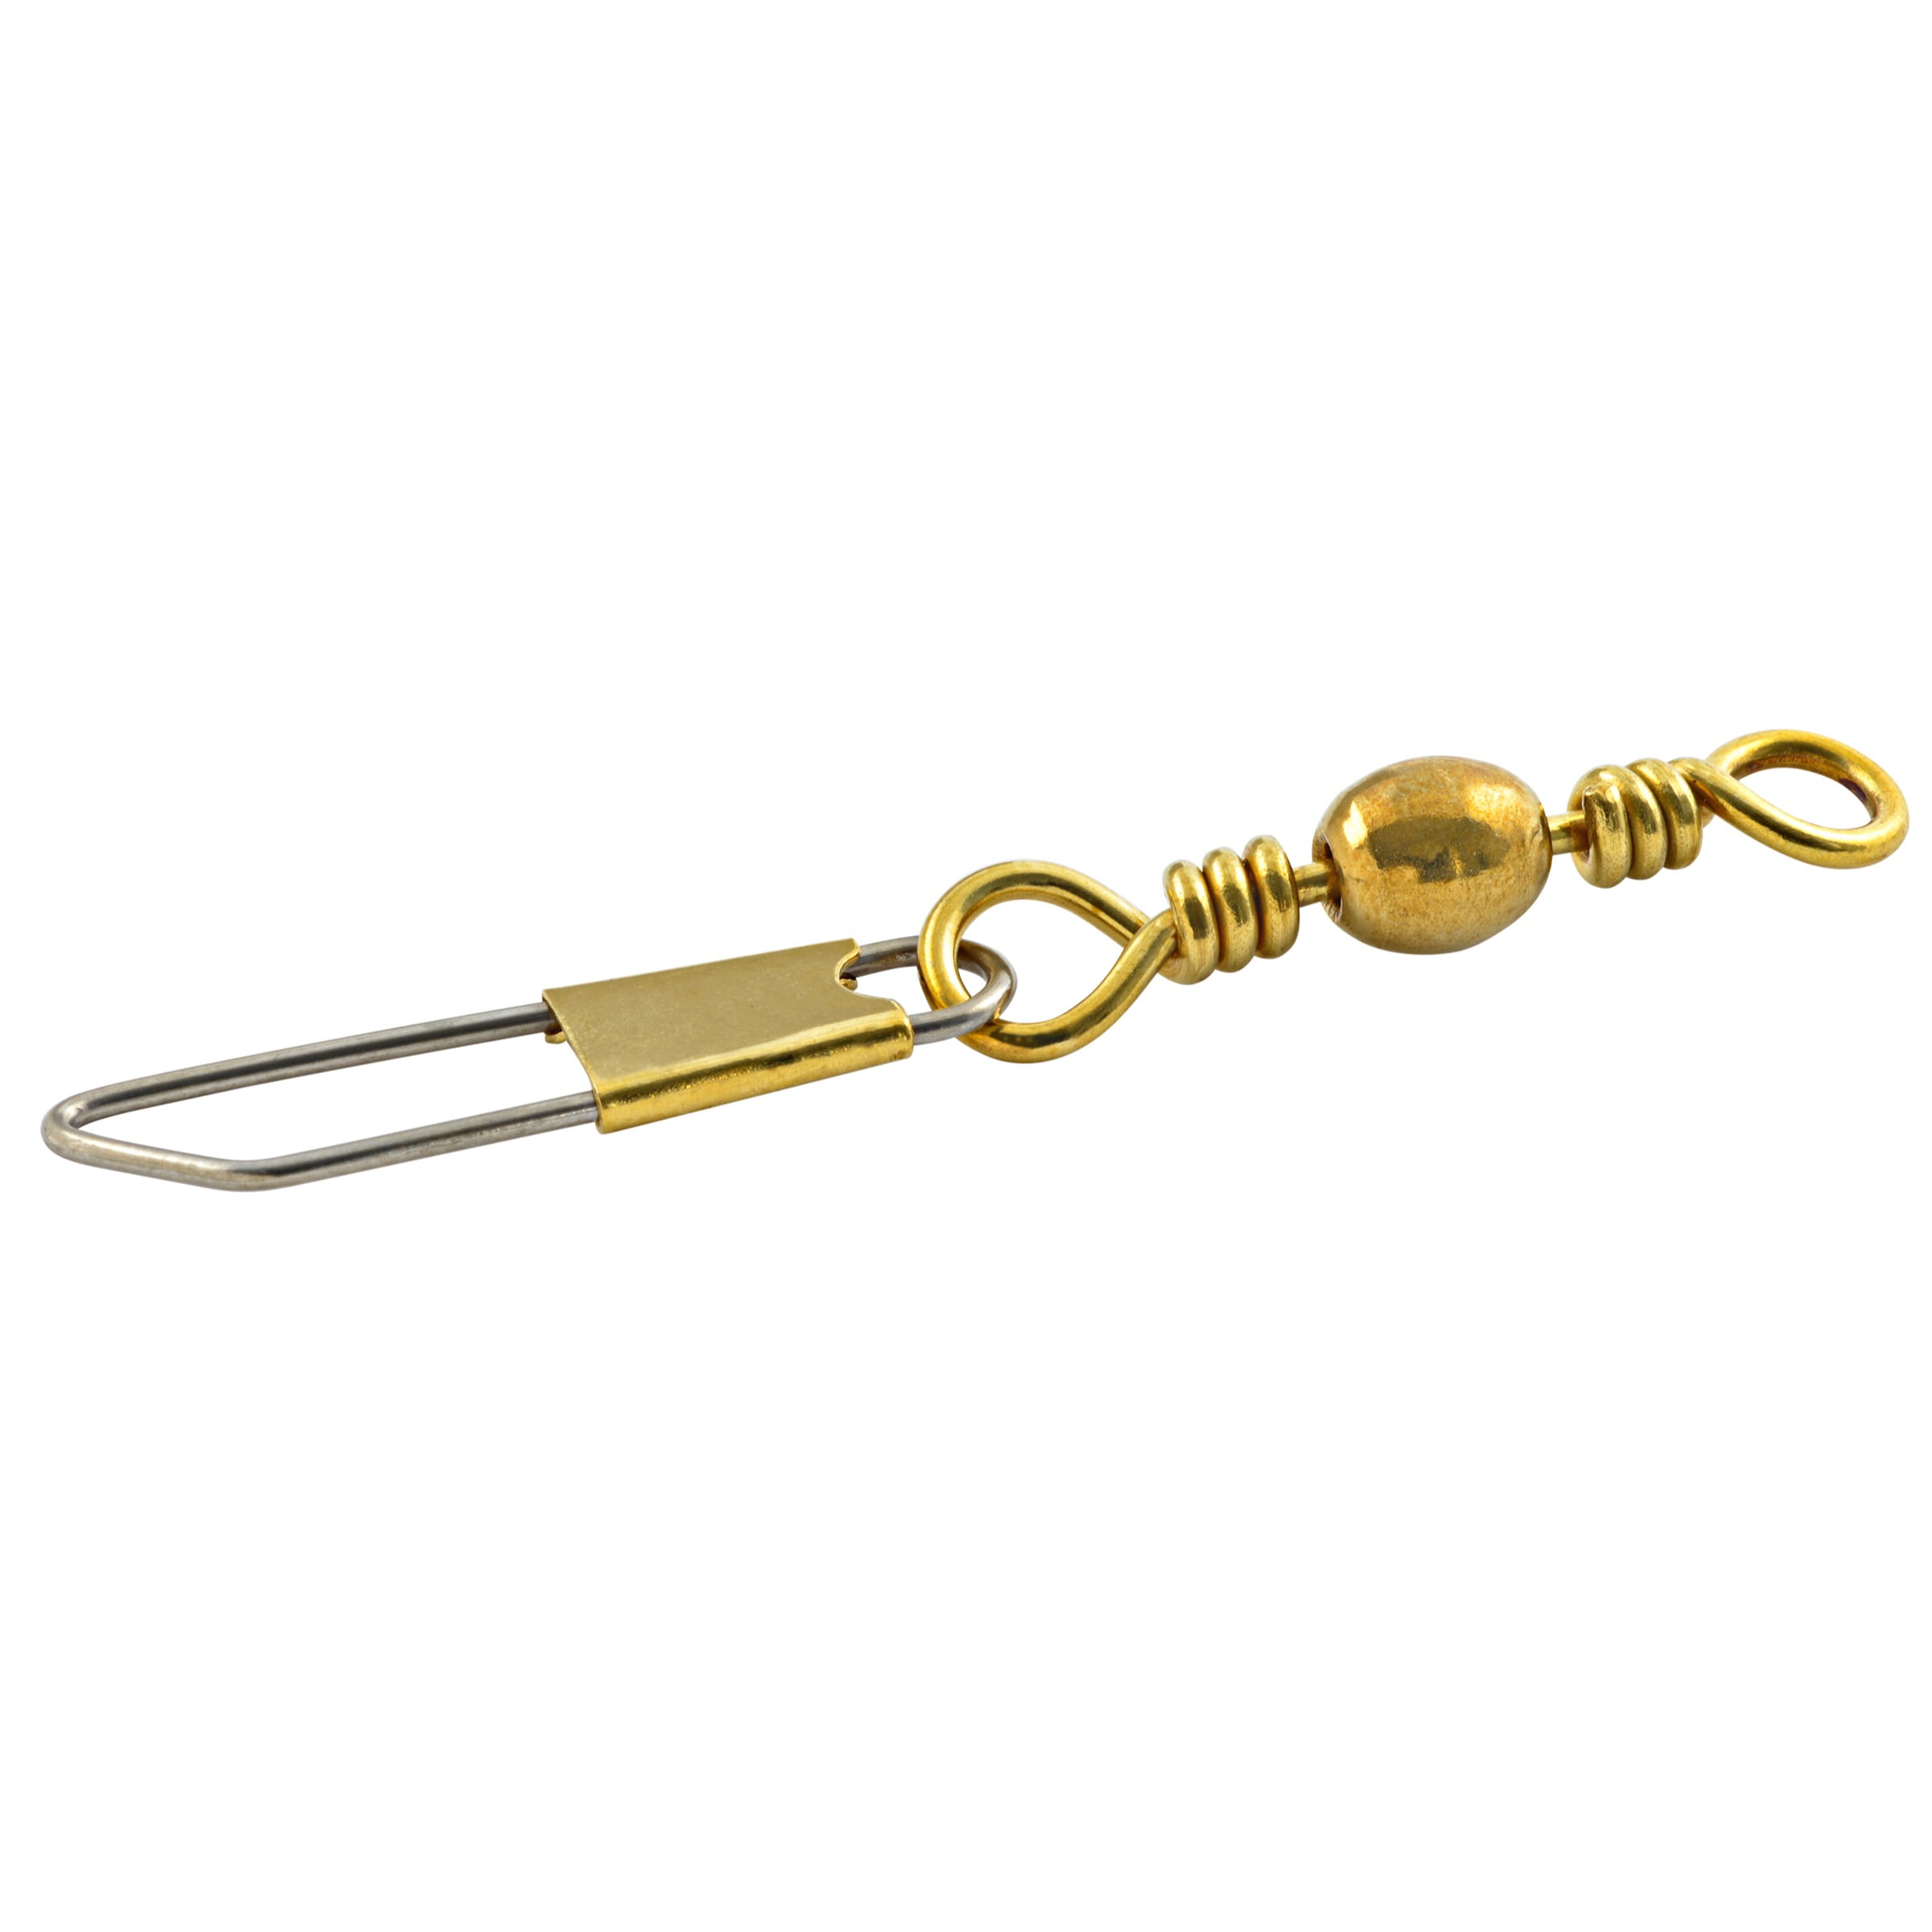 South Bend Snap Swivel Fishing Terminal Tackle, Brass, Size 5 